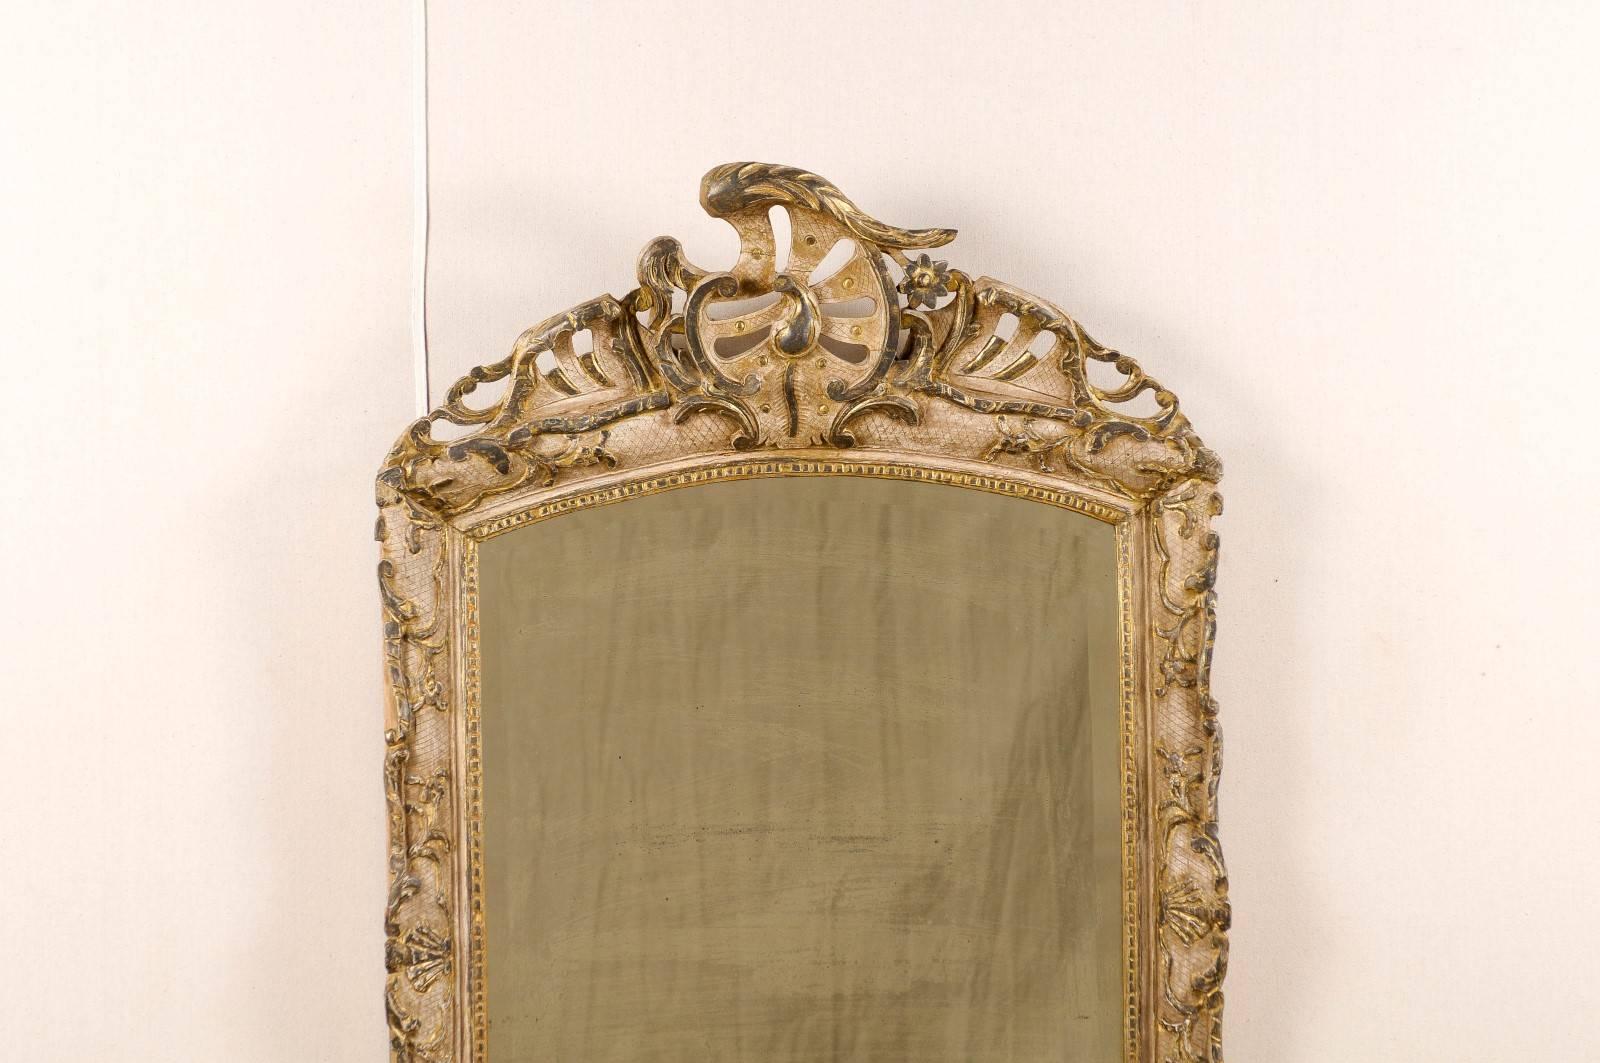 19th Century Italian Early 19th C. Rococo Style Mirror with Beautiful Pierce-Carved Crest For Sale